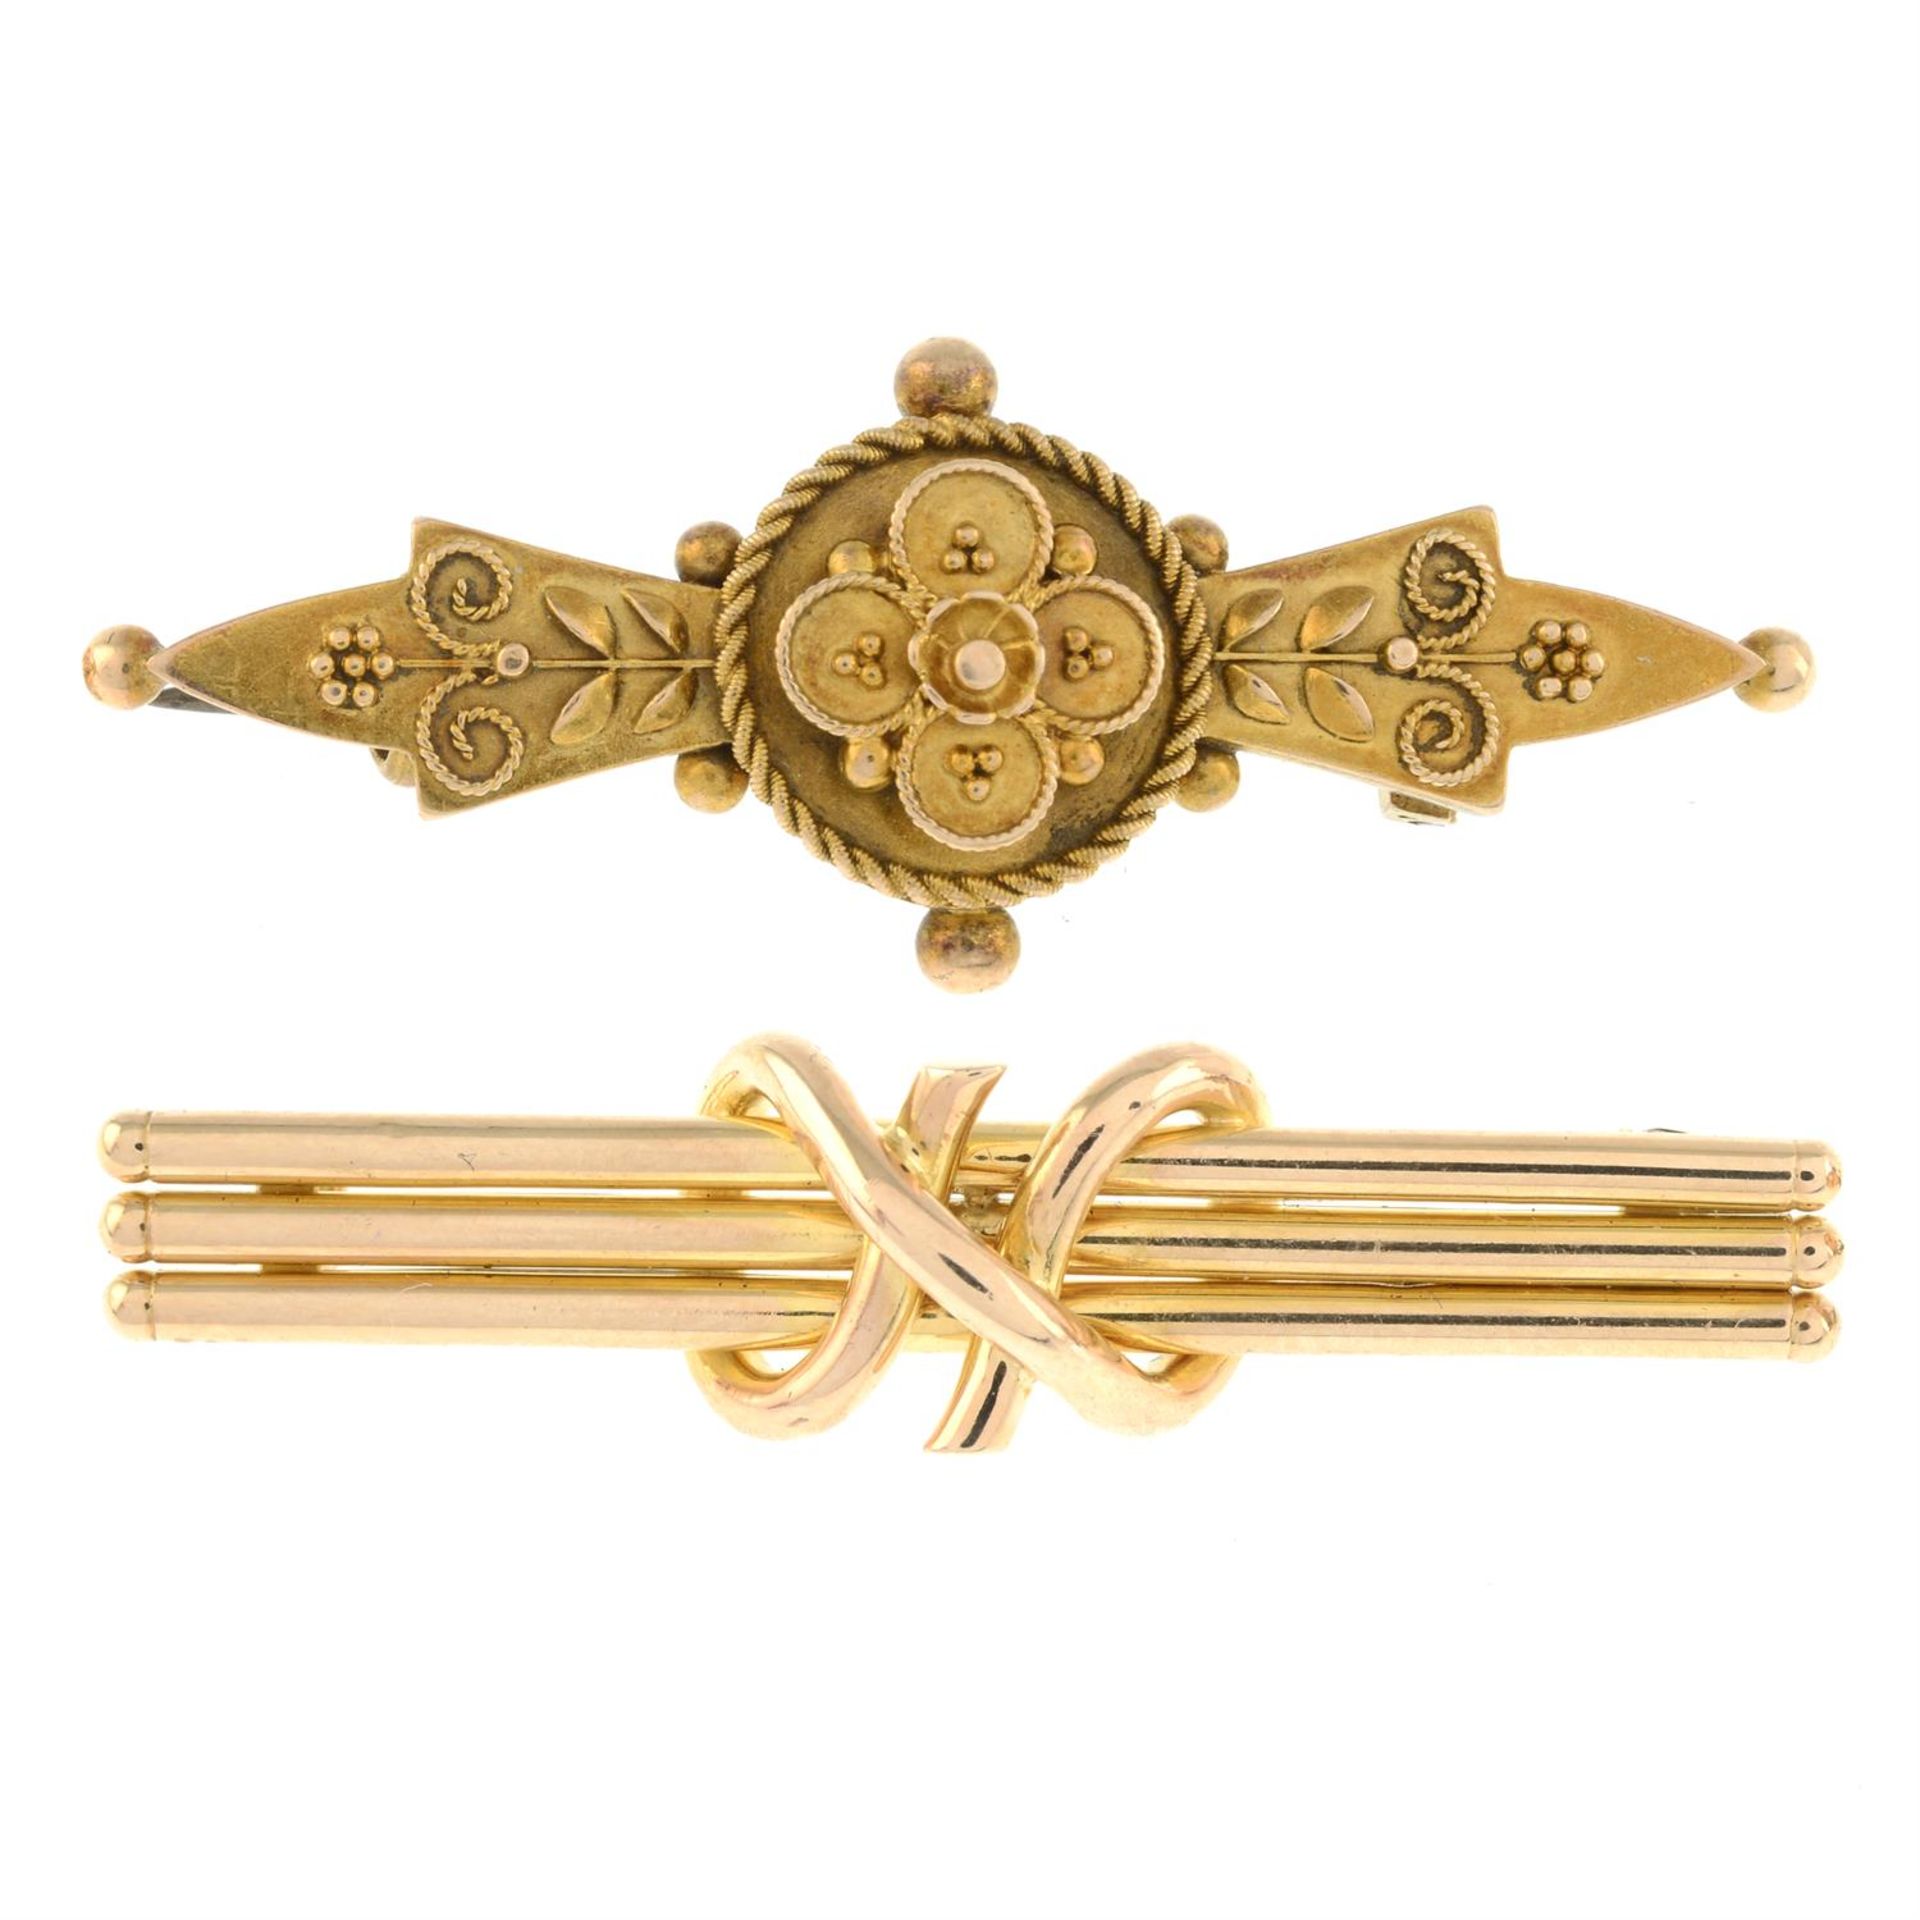 Victorian 15ct gold ornate foliate bar brooch, together with an early 20th century 15ct gold knot